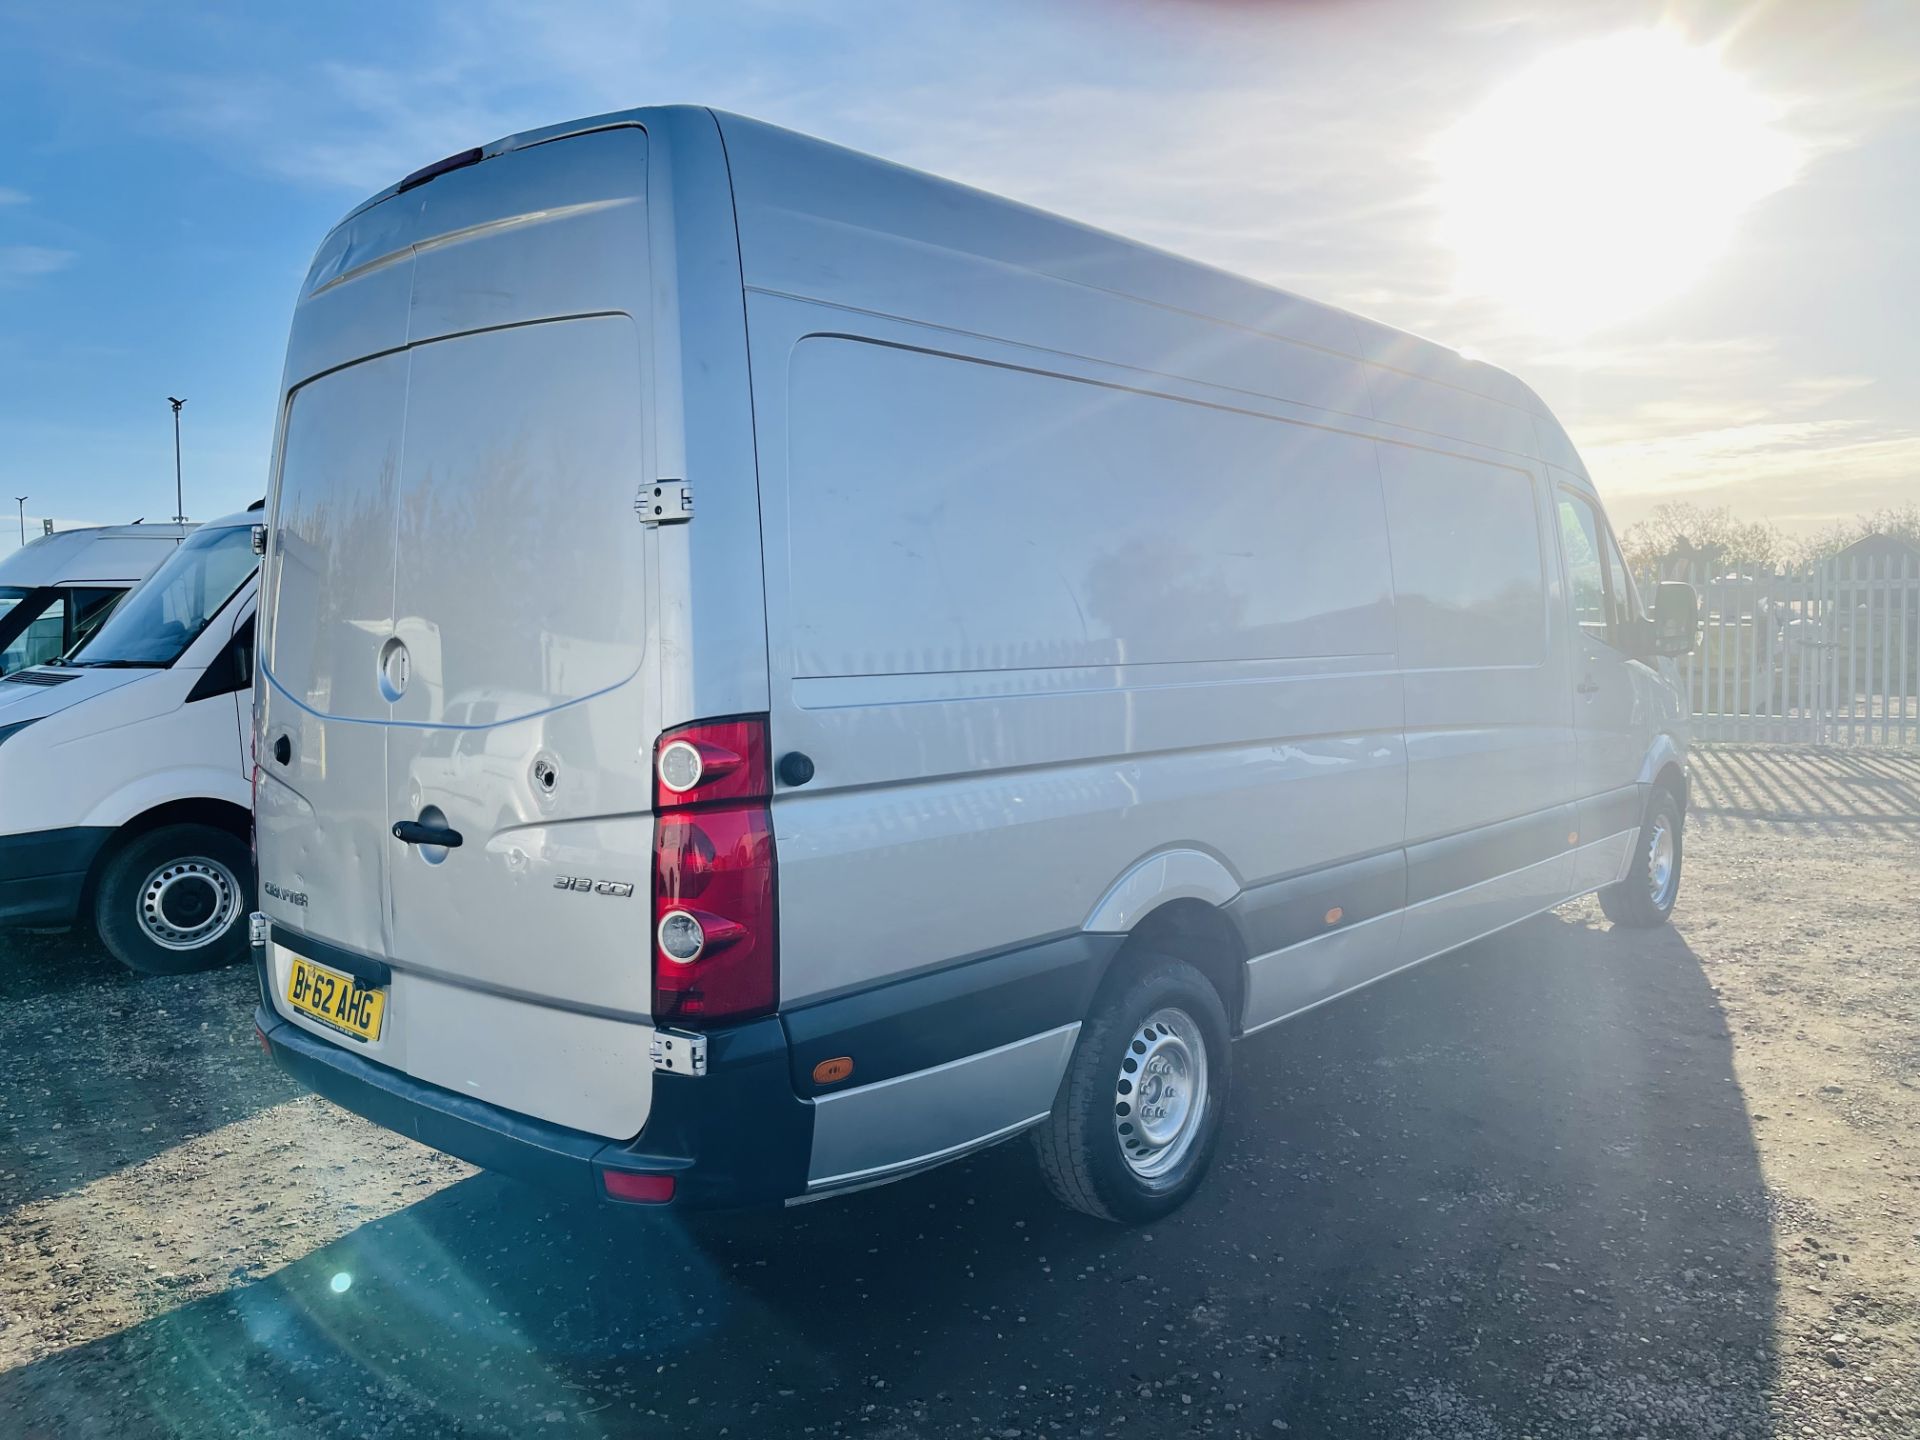 Volkswagen Crafter CR35 2.0 TDI 109 Bluemotion L3 H2 2012 '62 Reg' Air Con - Cruise Control - No Vat - Image 9 of 19